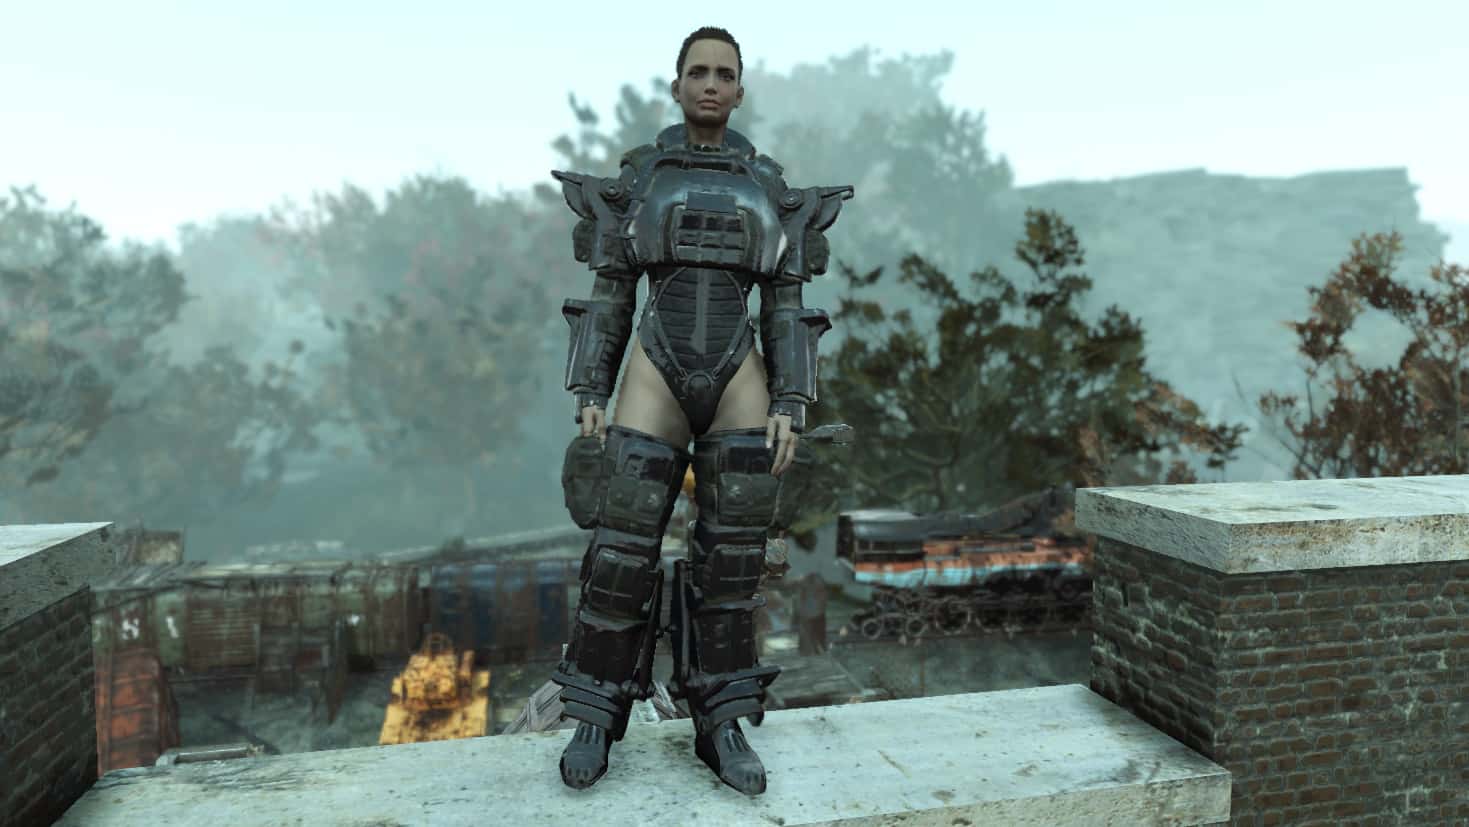 Se*y Marine Armor - Fallout 76 Mod download.